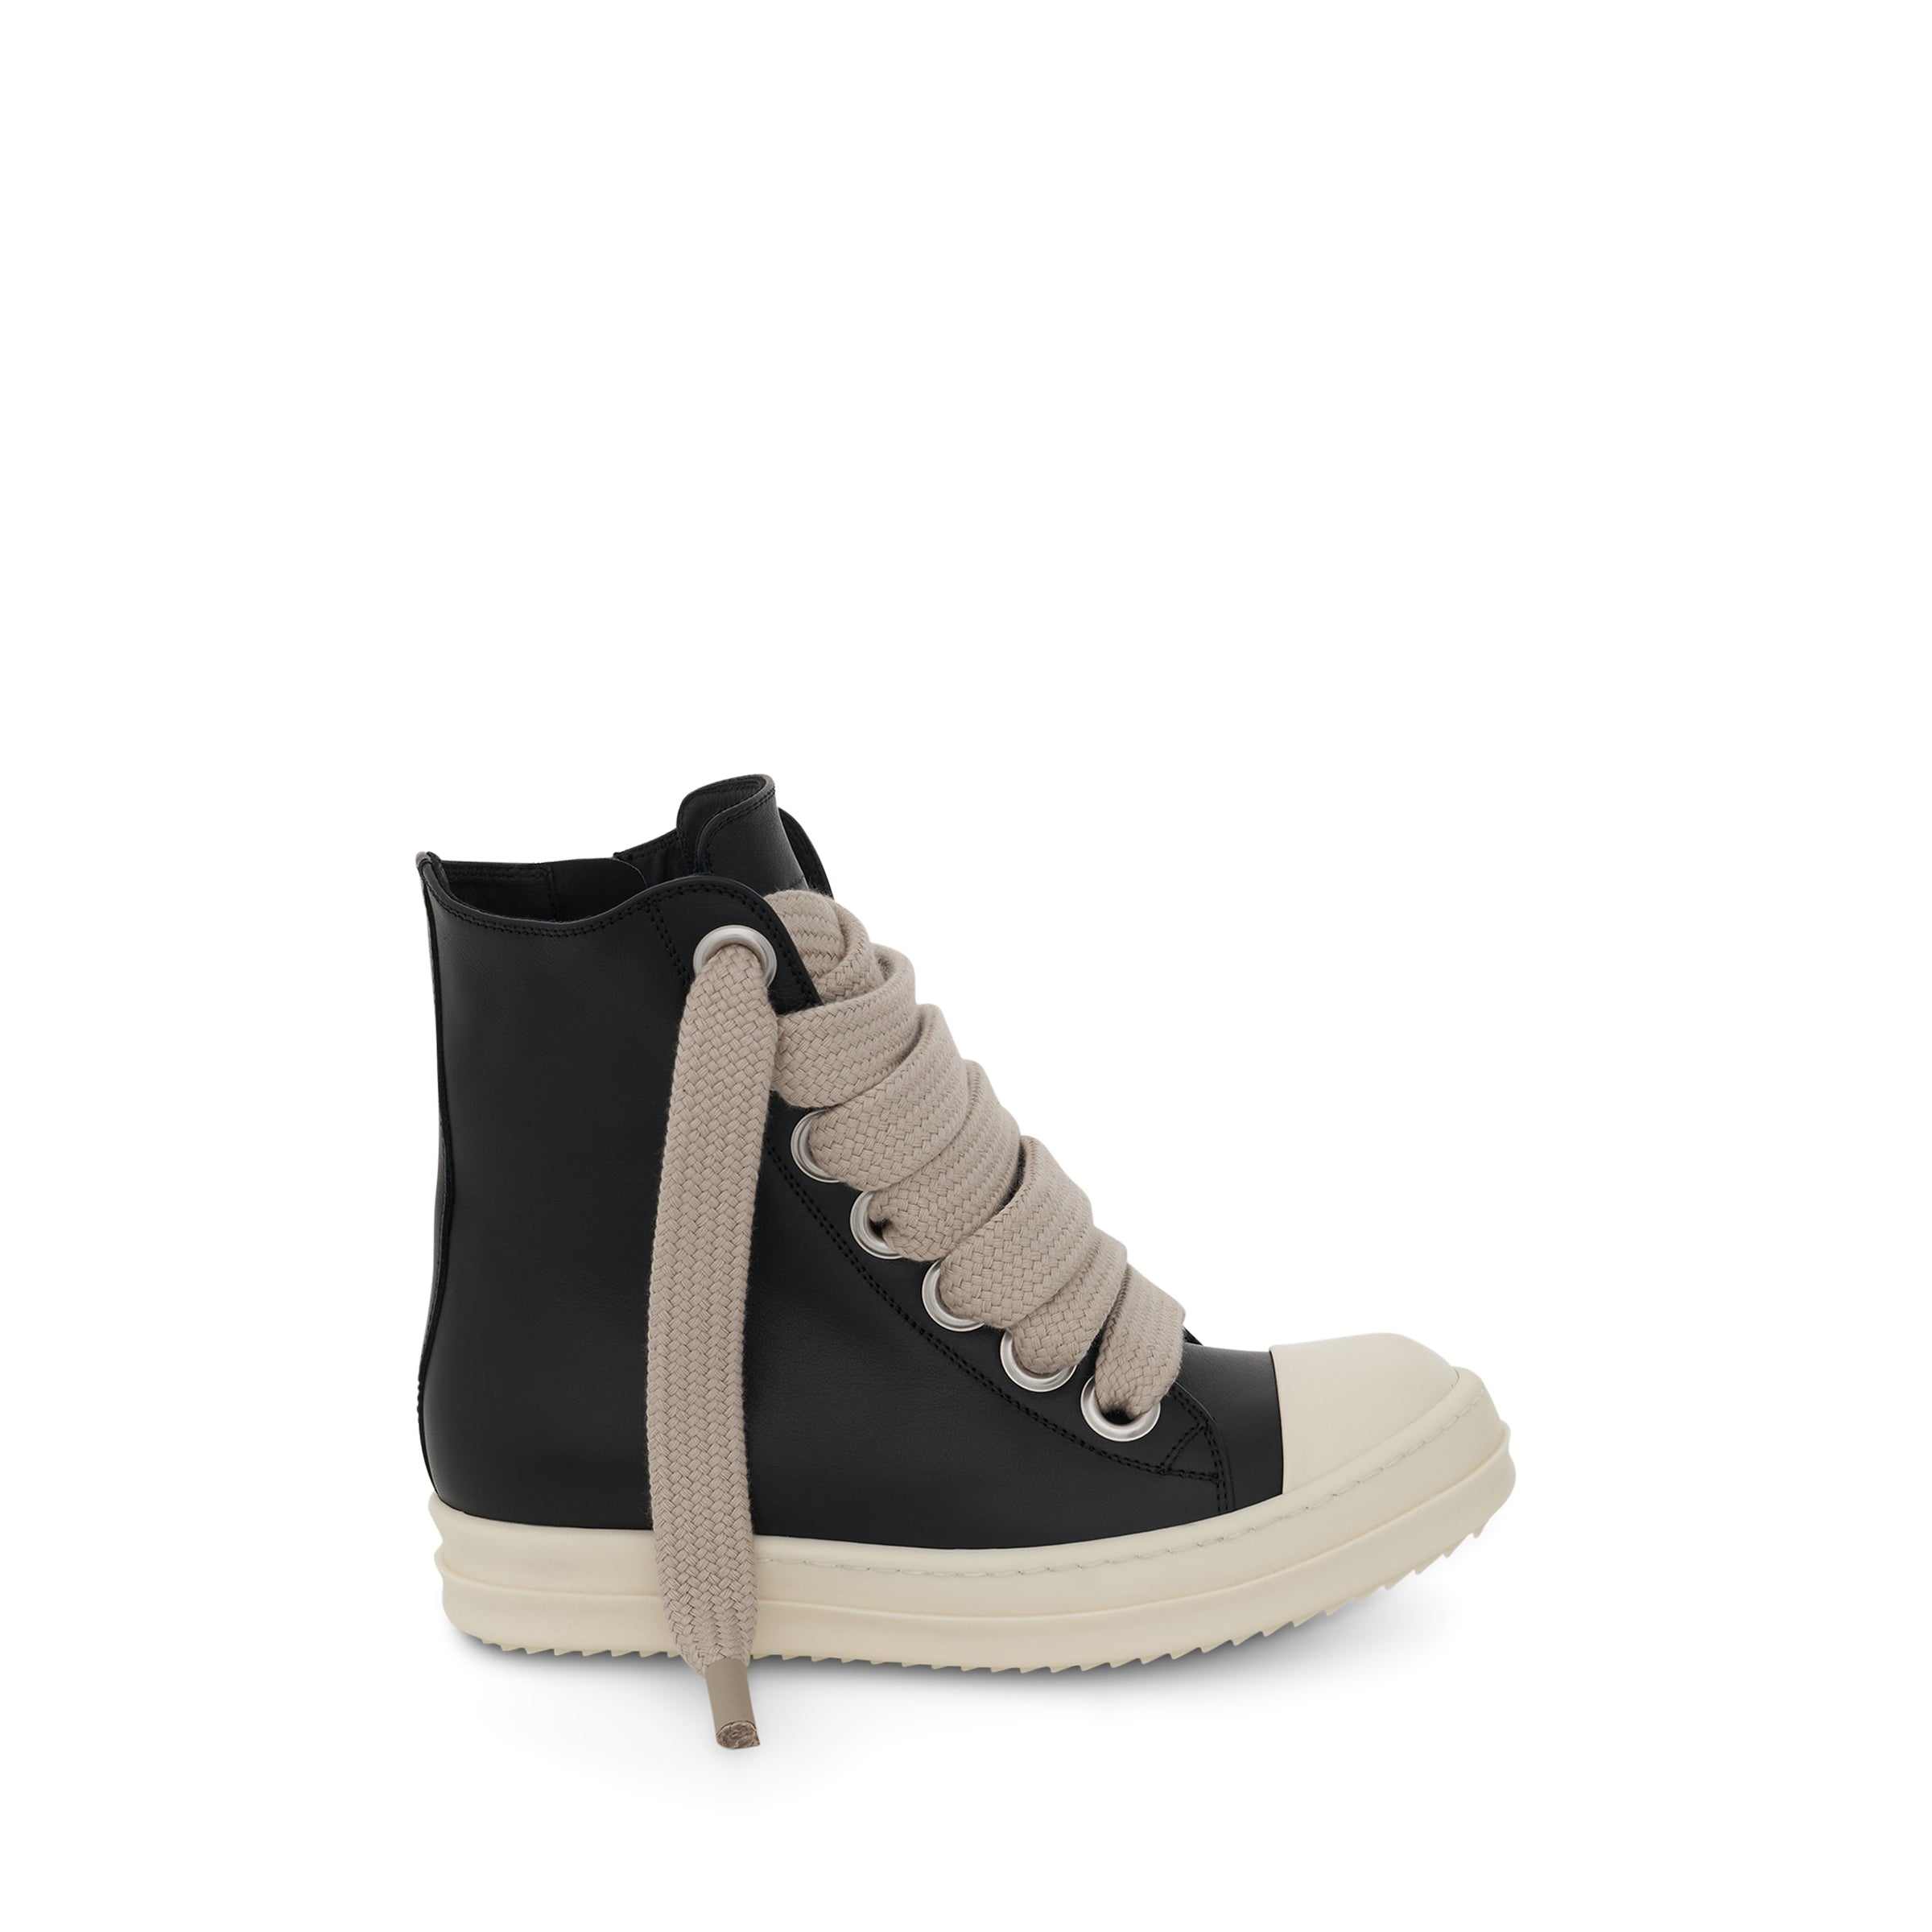 RICK OWENS High Top Sneaker with Jumbo Laces in Black/Milk – MARAIS